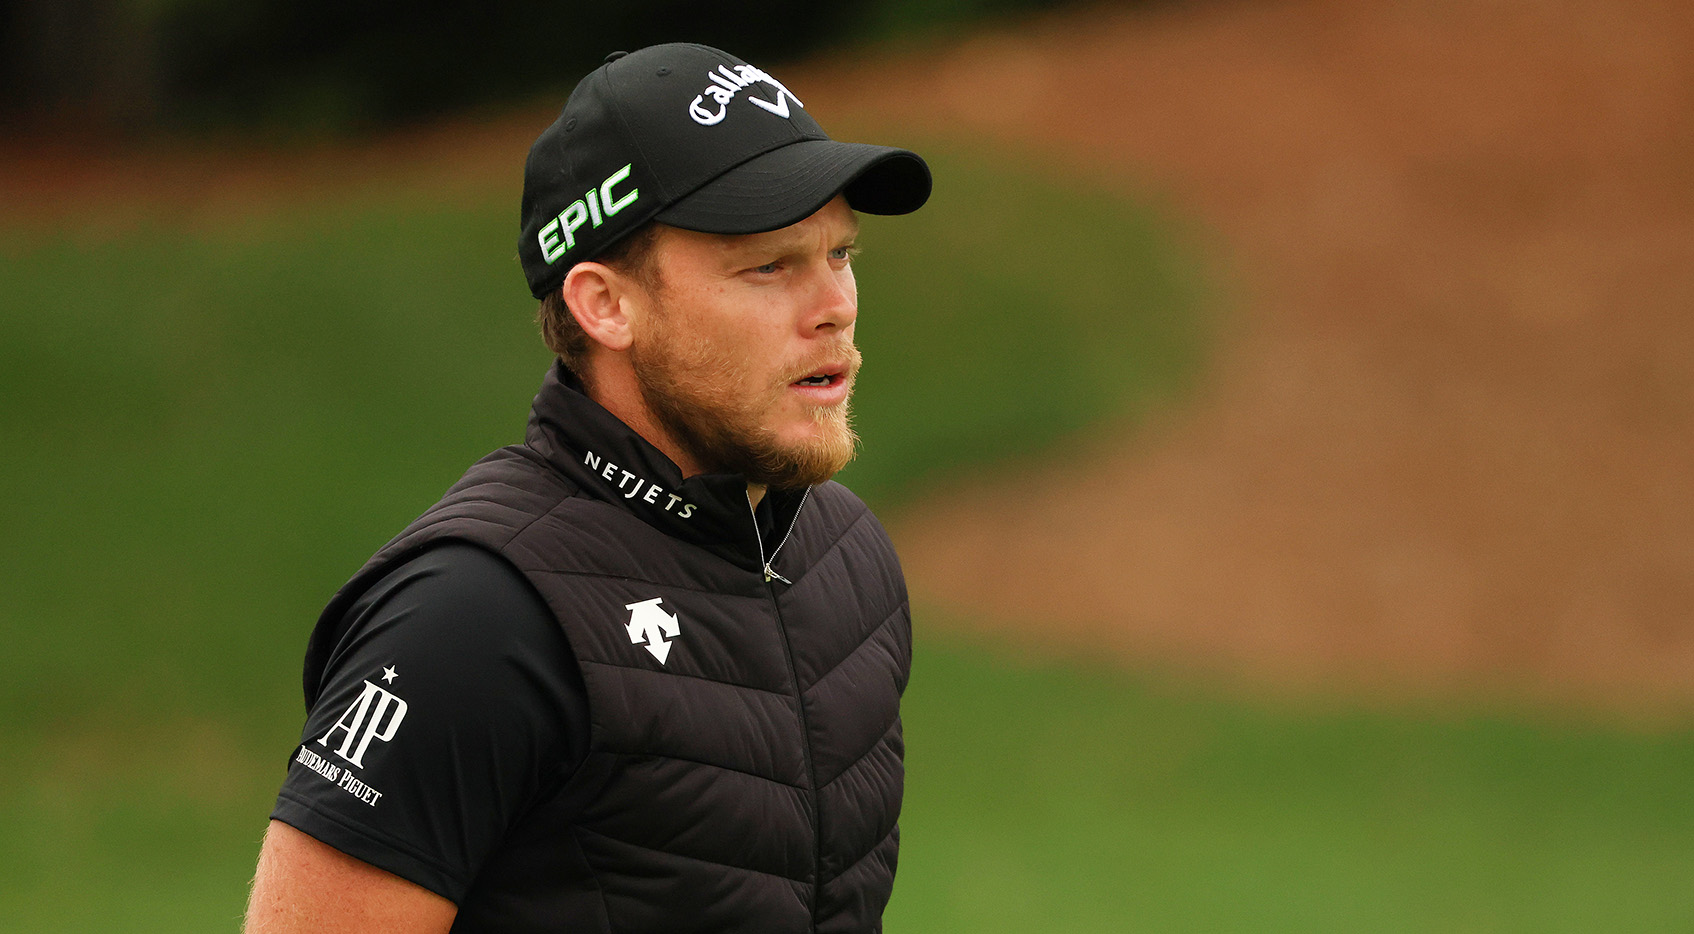 Danny Willett tests positive for COVID-19, withdraws from THE PLAYERS Championship